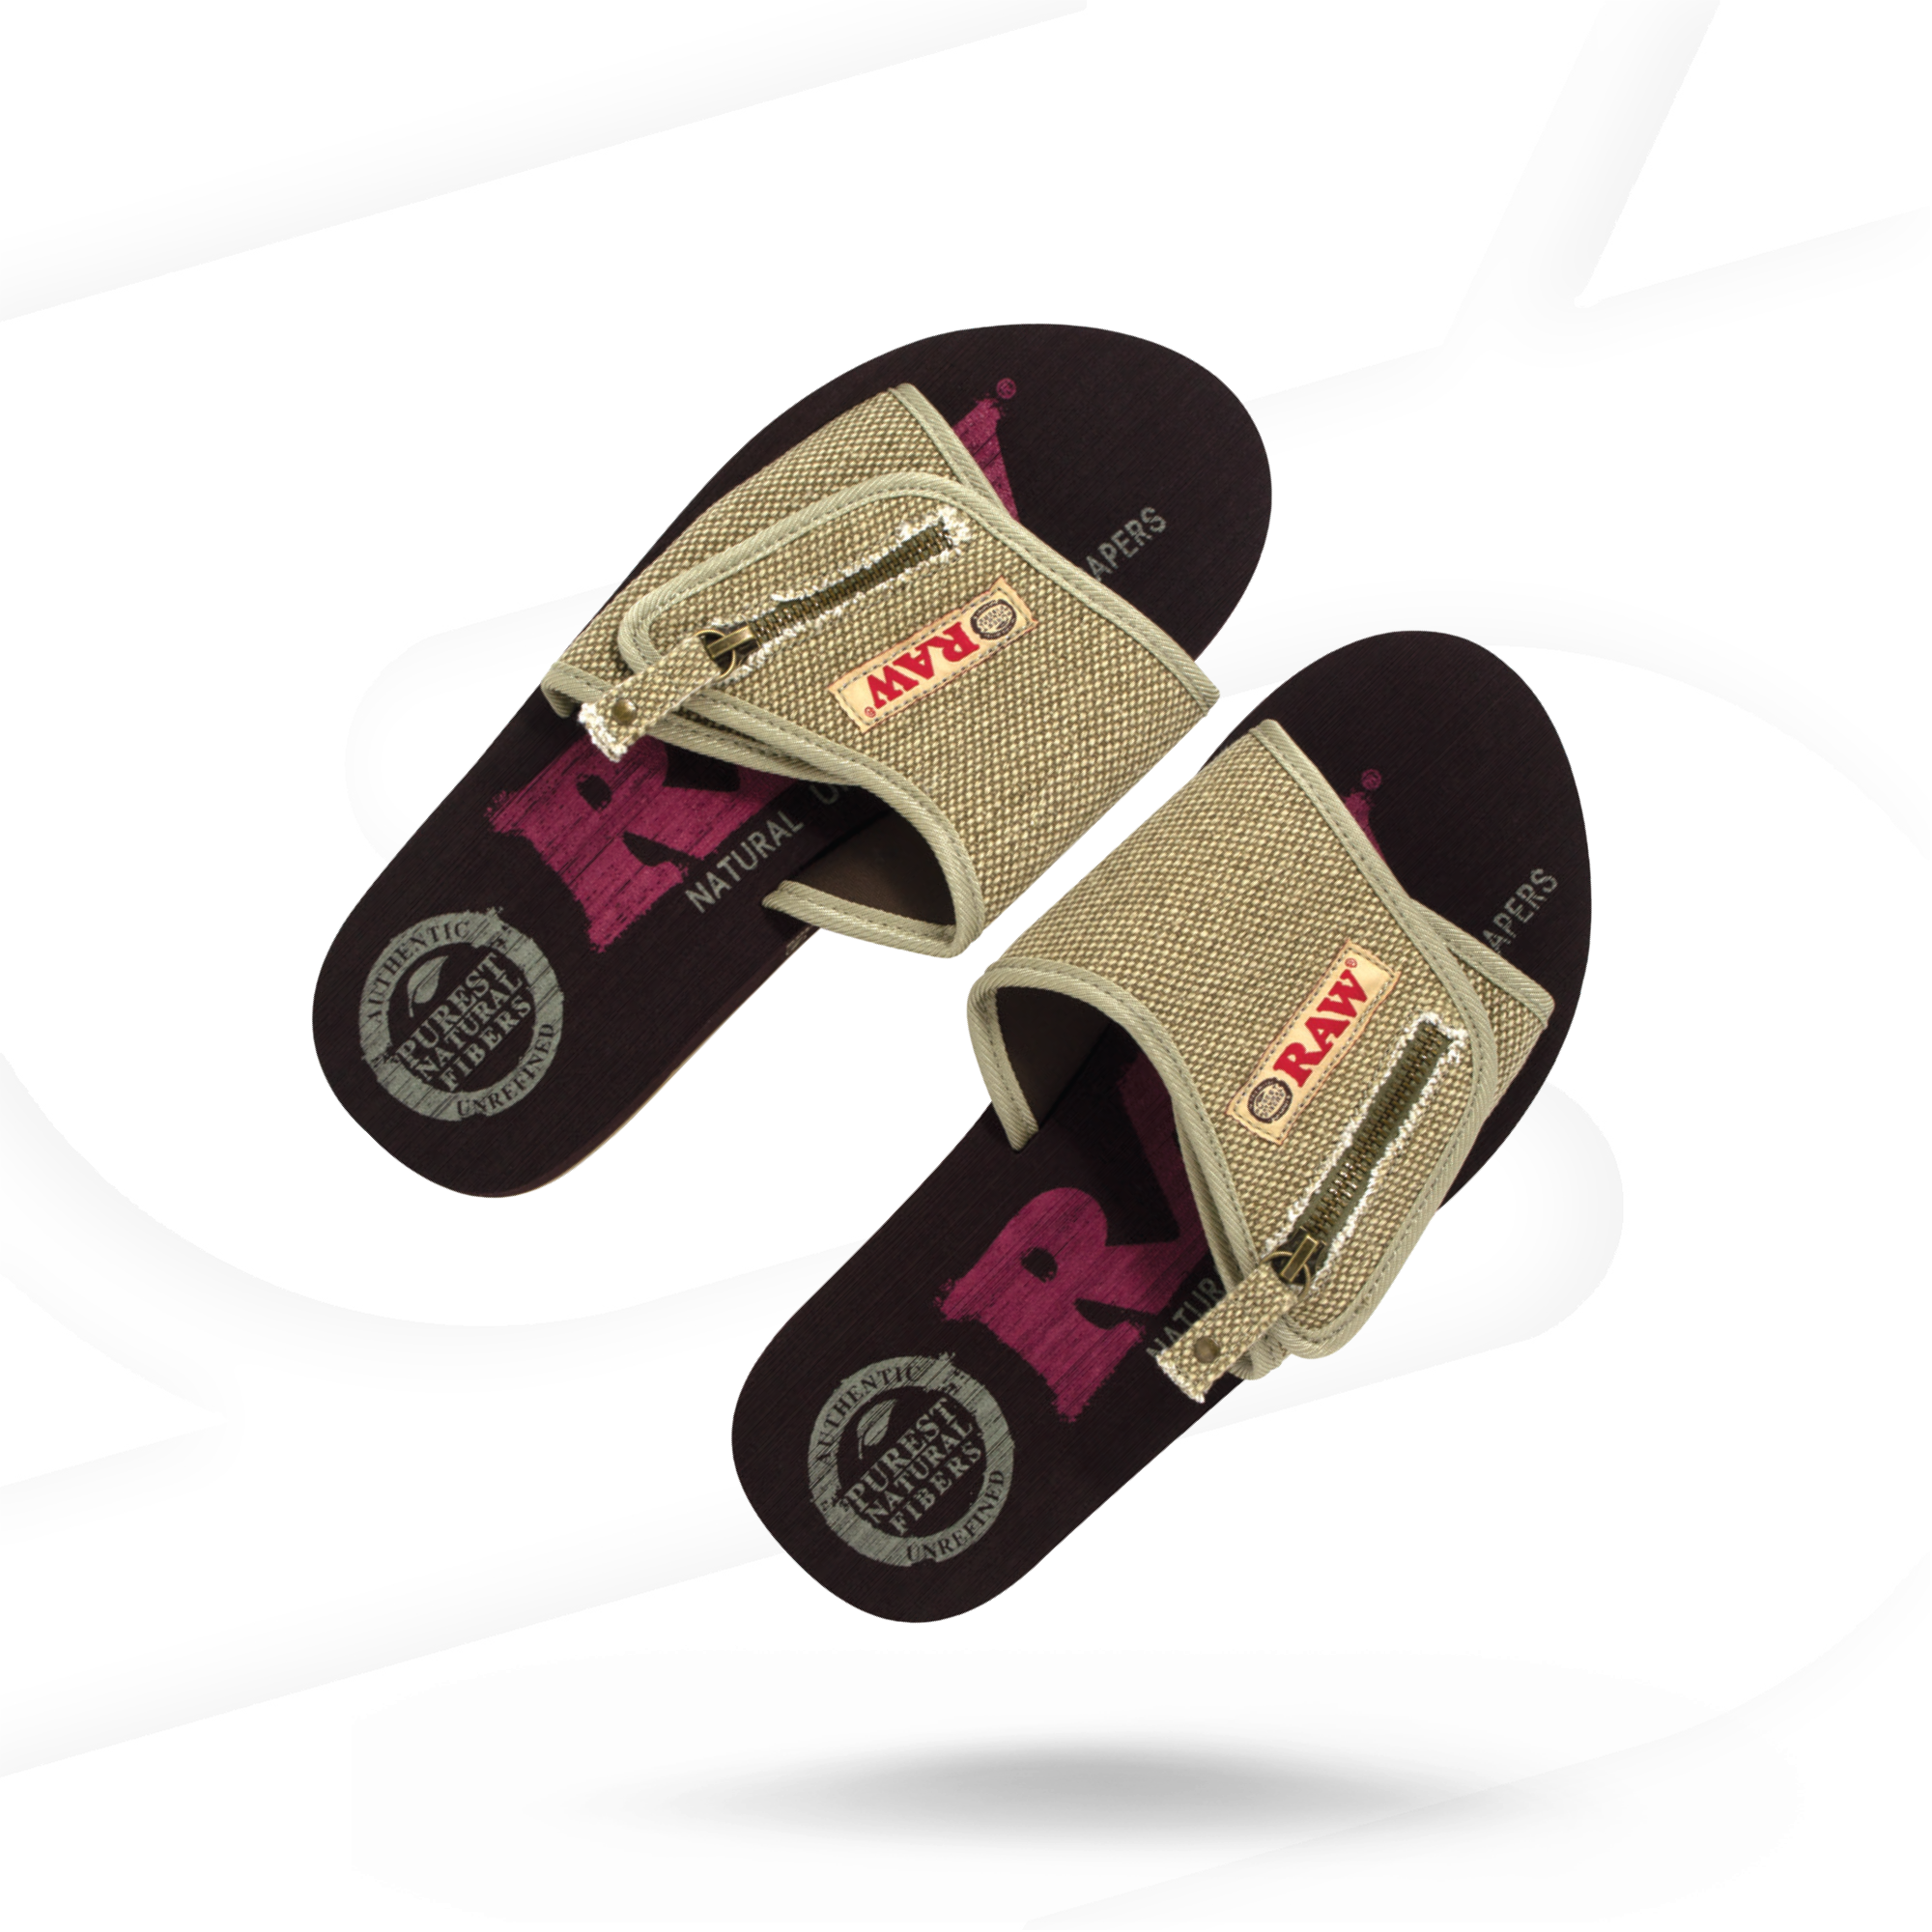 RAW X Rolling Papers Slides | Ladies Clothing Accessories WAR00561-MUSA01 esd-official